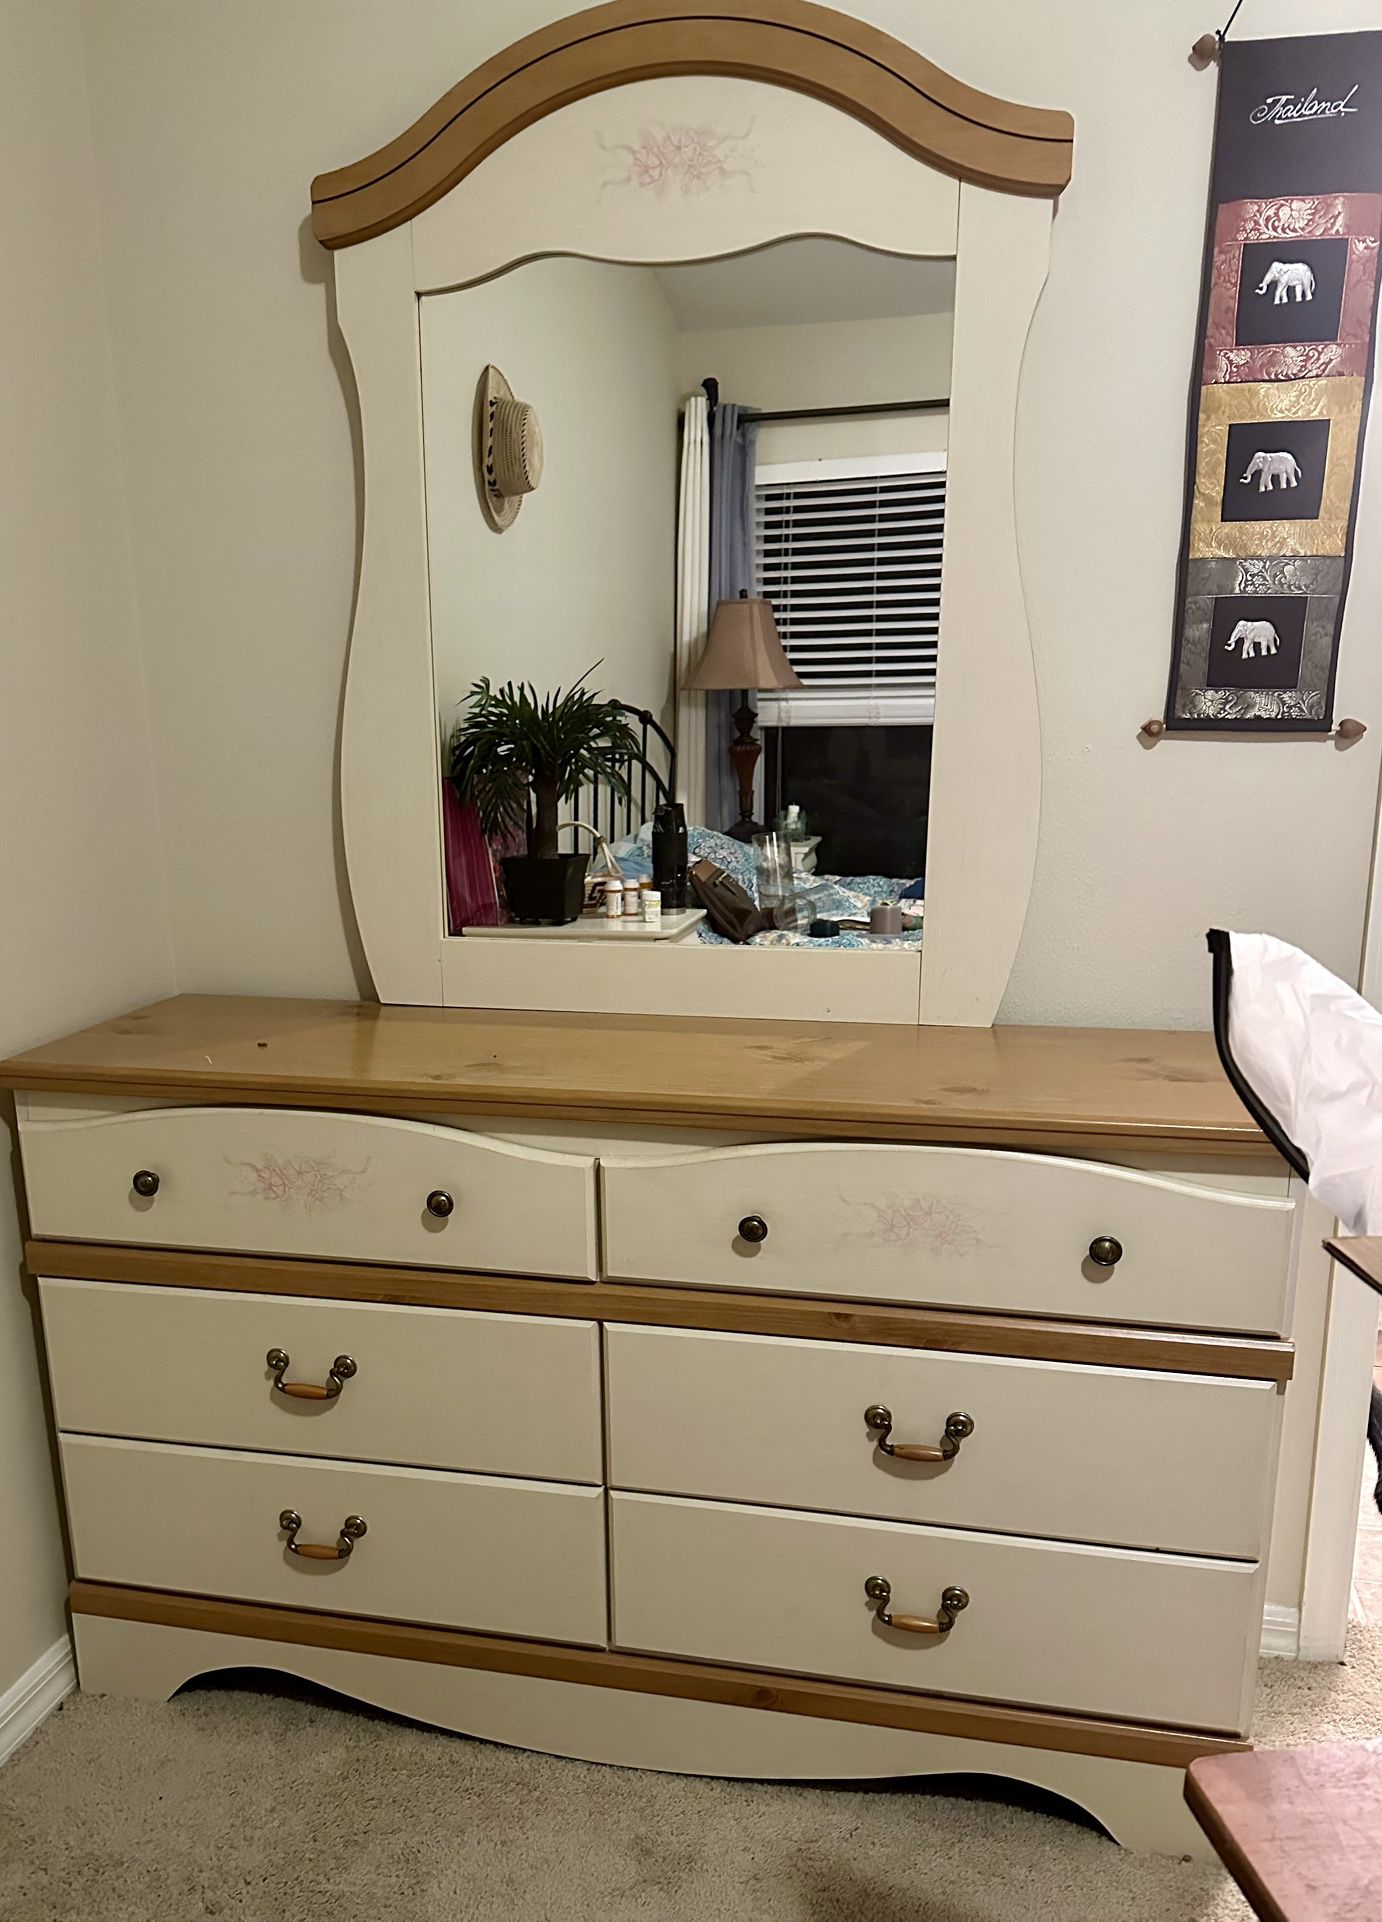 Dresser With Mirror - Off White/ Wood Tree